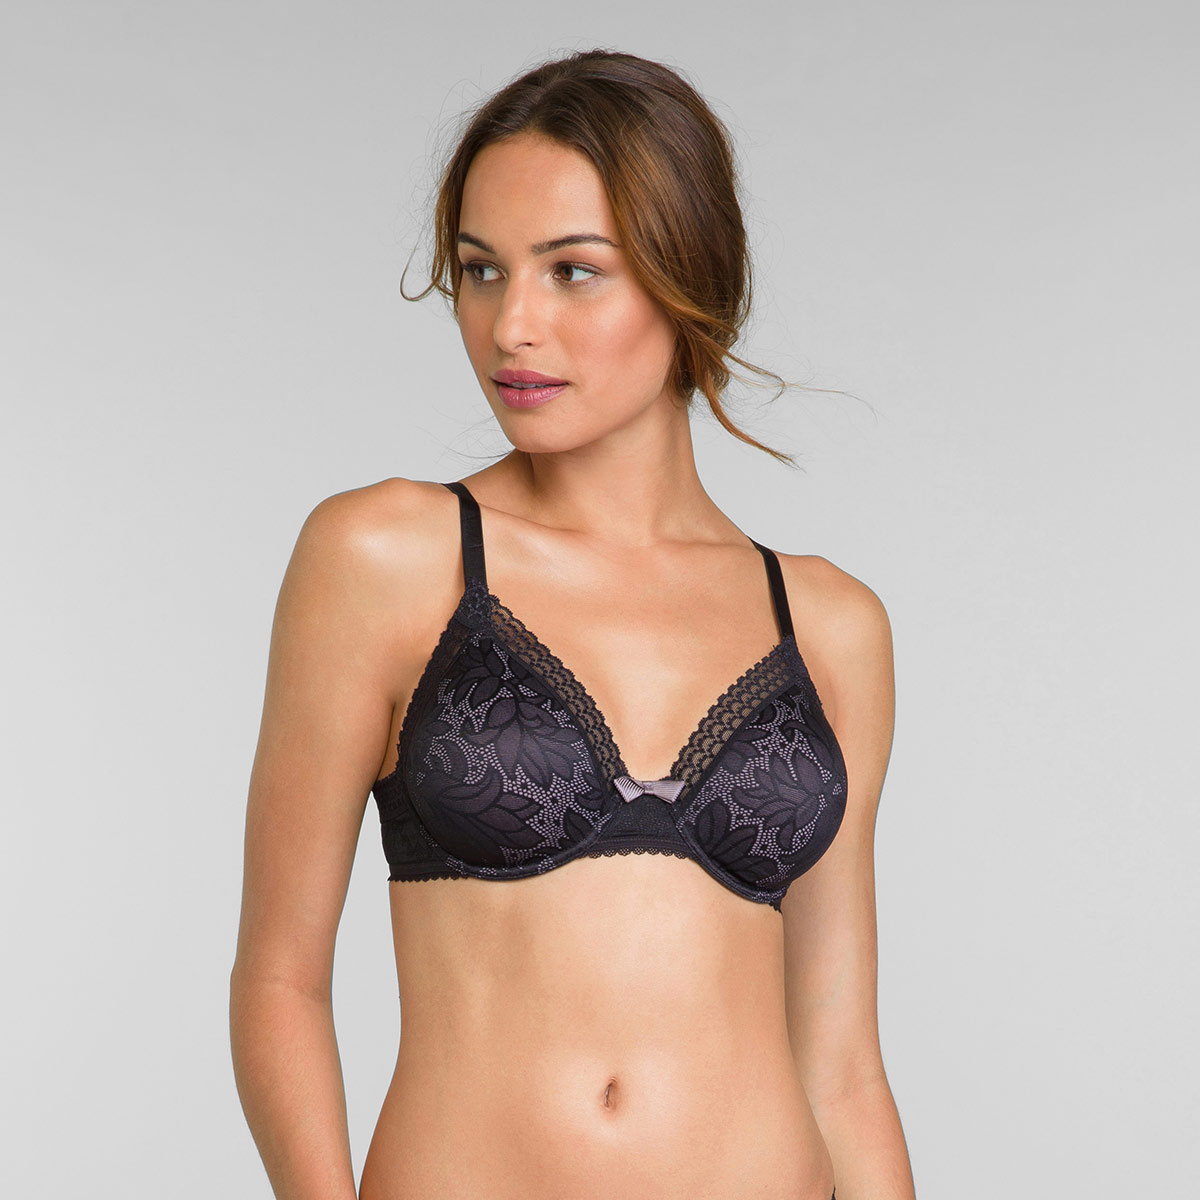 Foulard Full Cup Bra in Black Lace - Invisible Elegance, , PLAYTEX